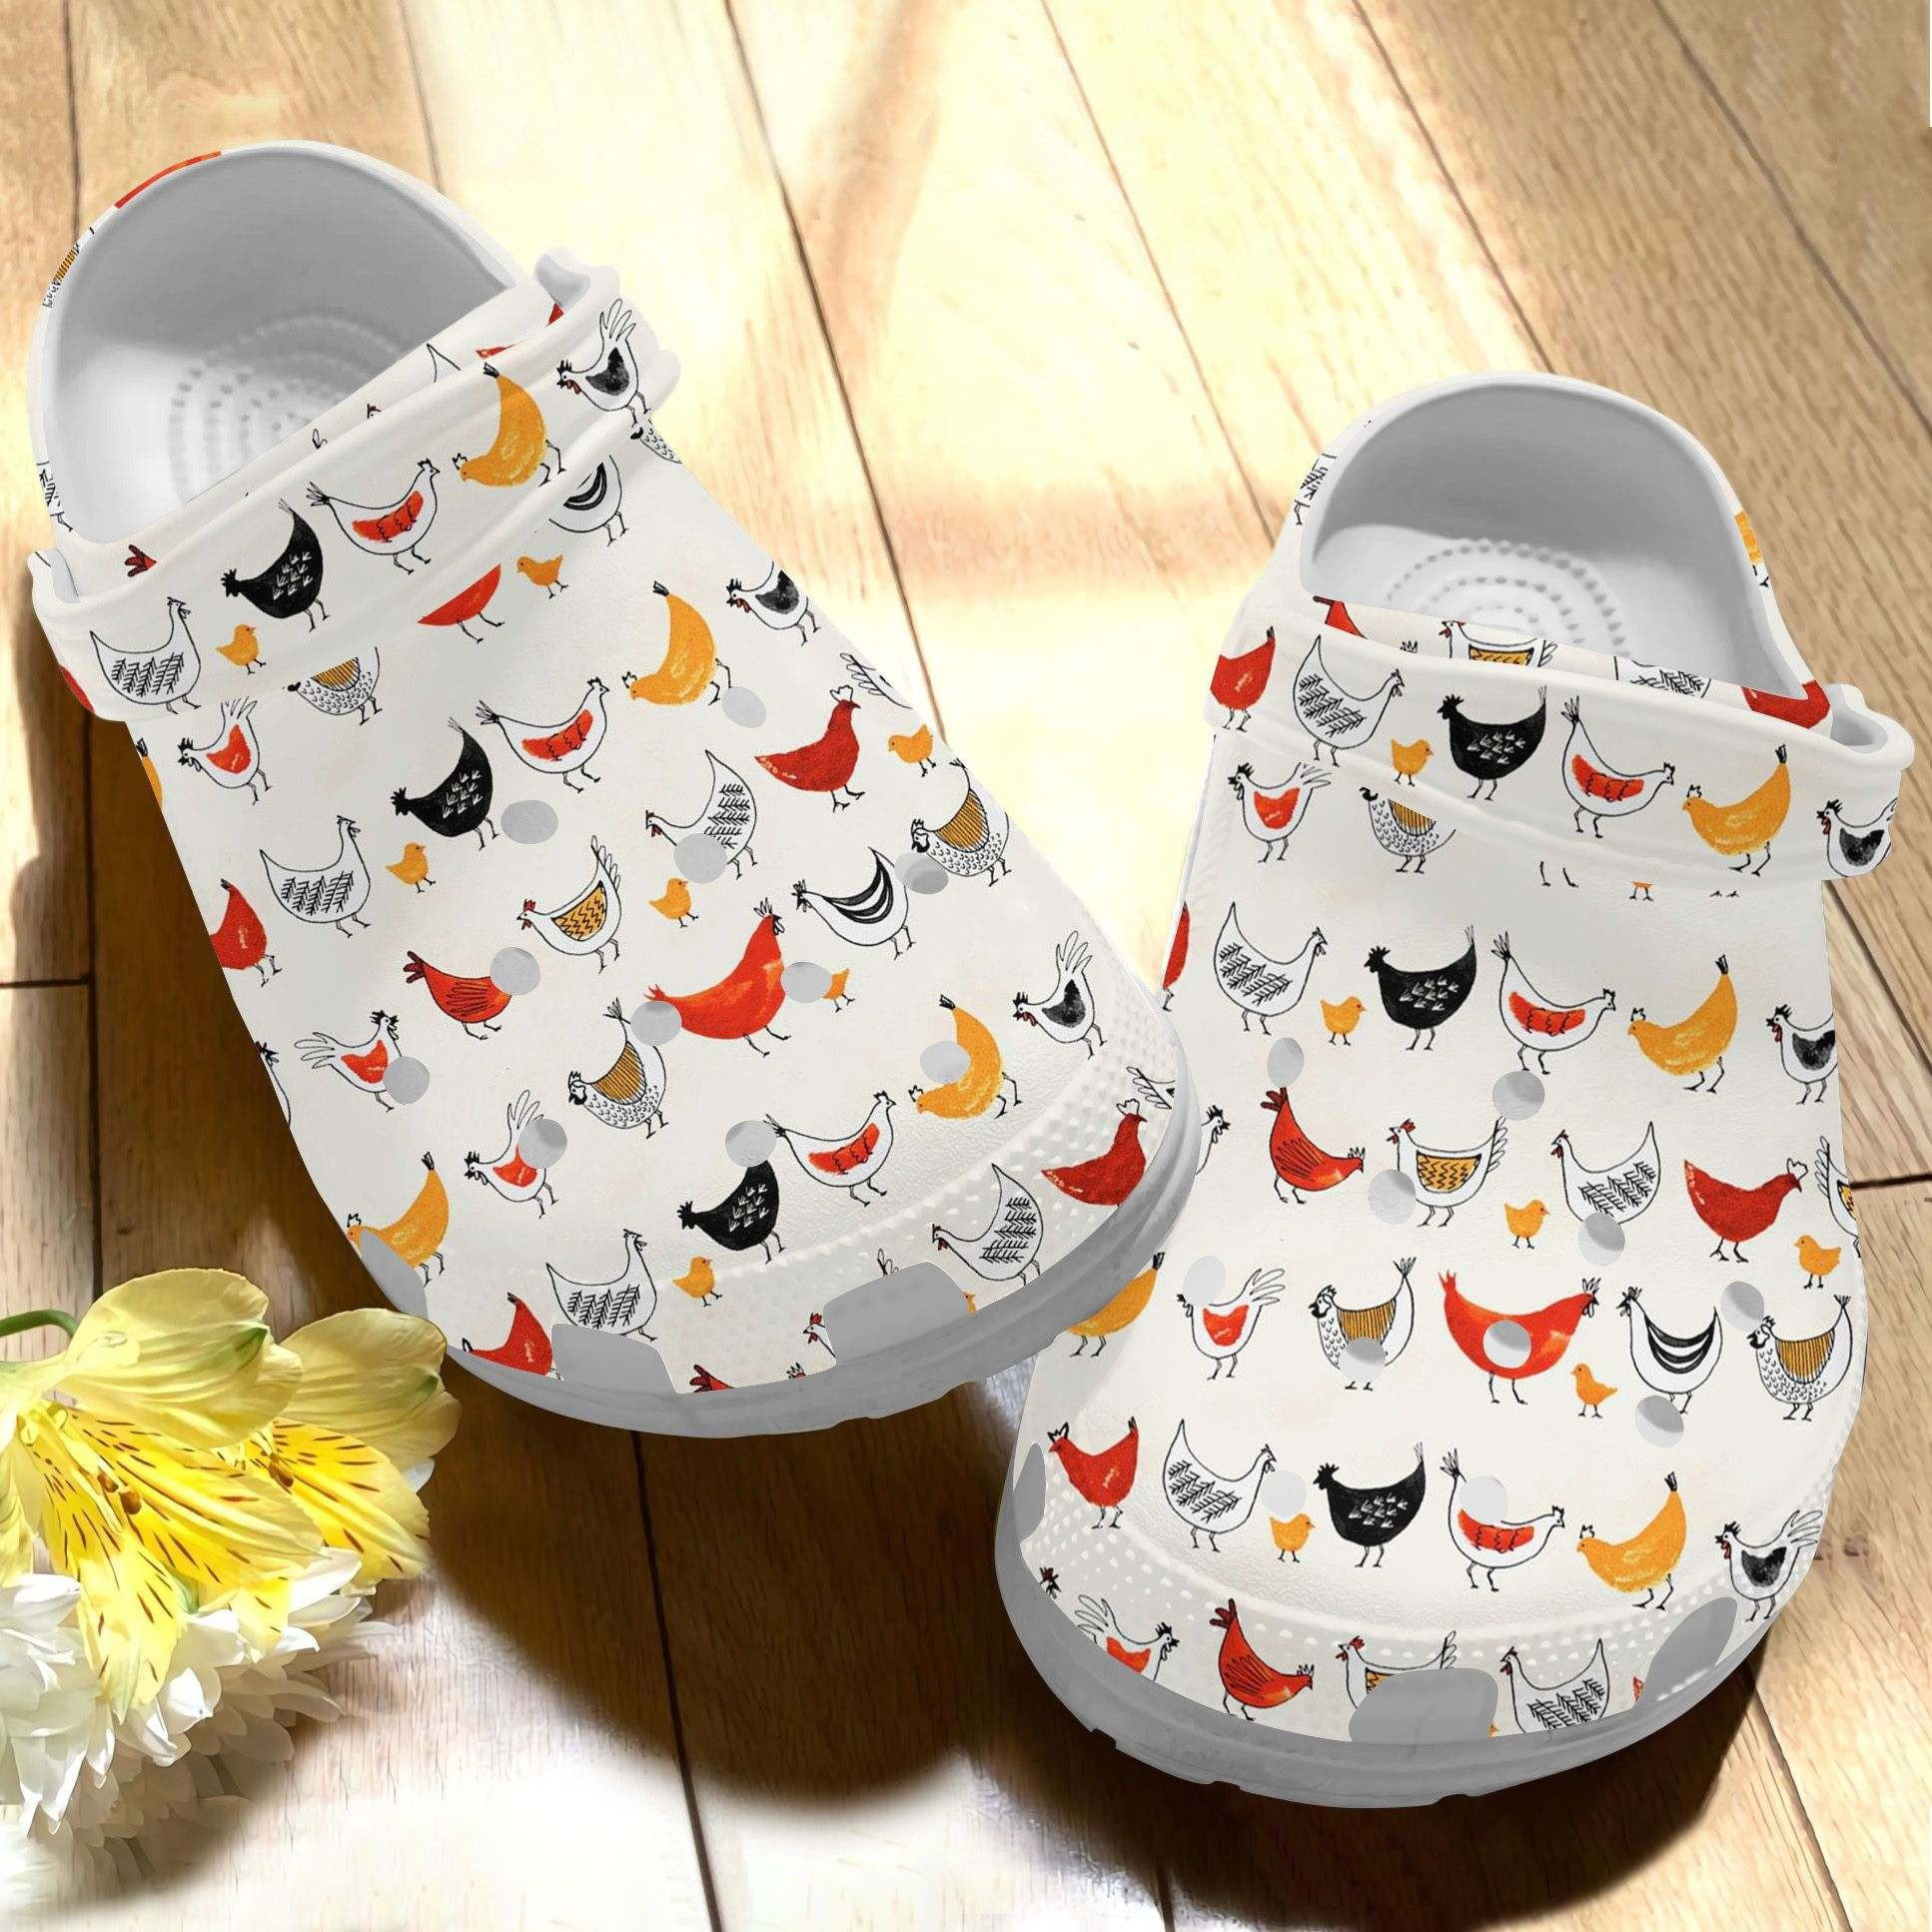 Chibi Chicken Croc Shoes - Chicken Cute Dog Crocbland Clog Gifts For Niece Daughter Sister